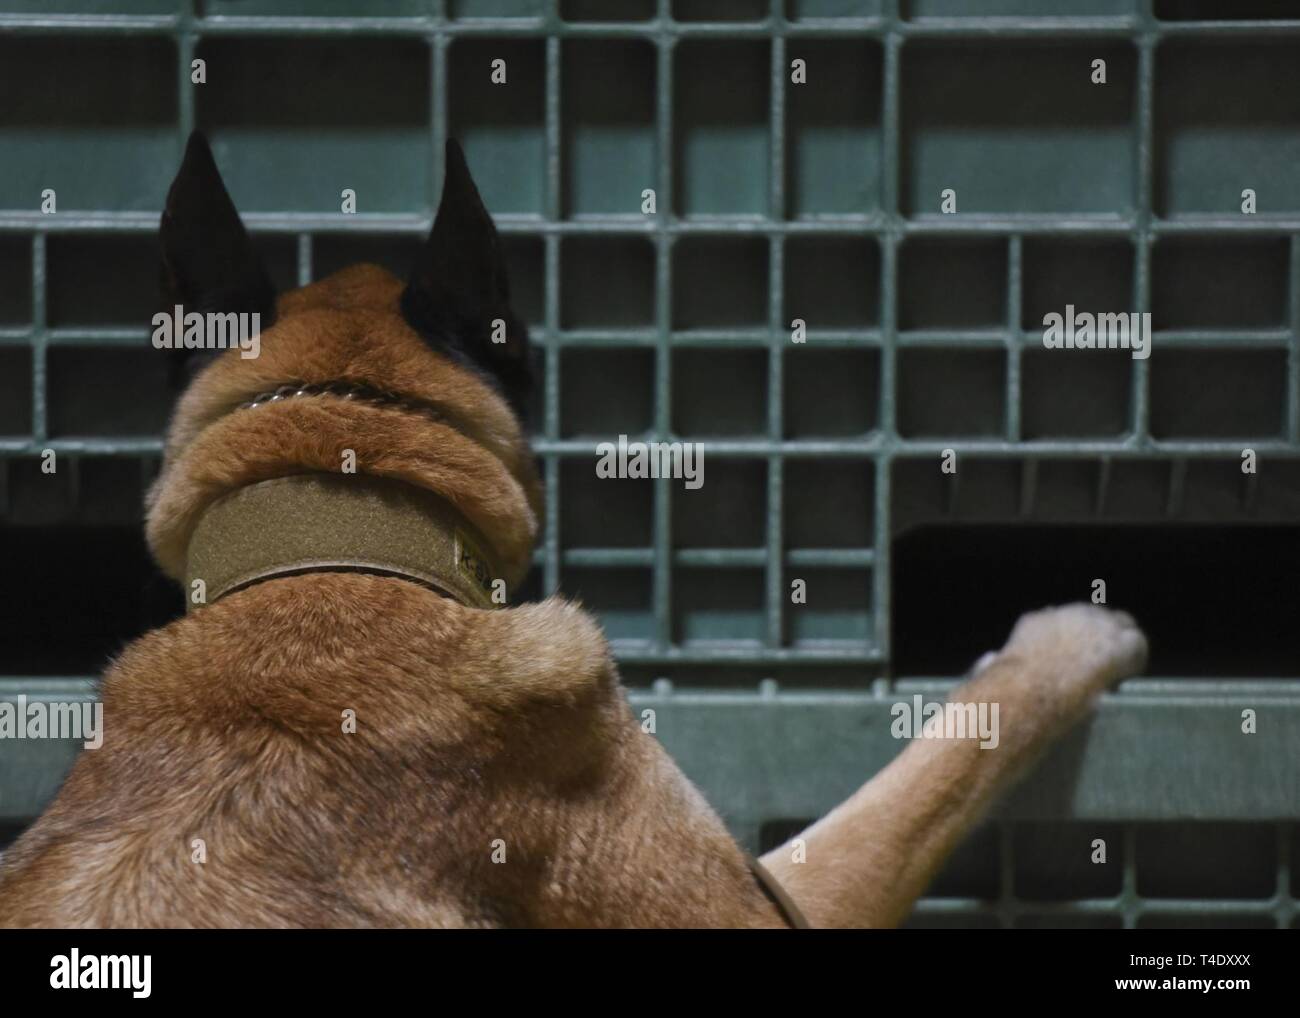 A military working dog checks a storage container during a detection exercise at Joint Base Langley-Eustis, Virginia, March 22, 2019. Federal Bureau of Investigation special agents conducted peroxide scents training that consisted of imprinting and detection phases. Stock Photo